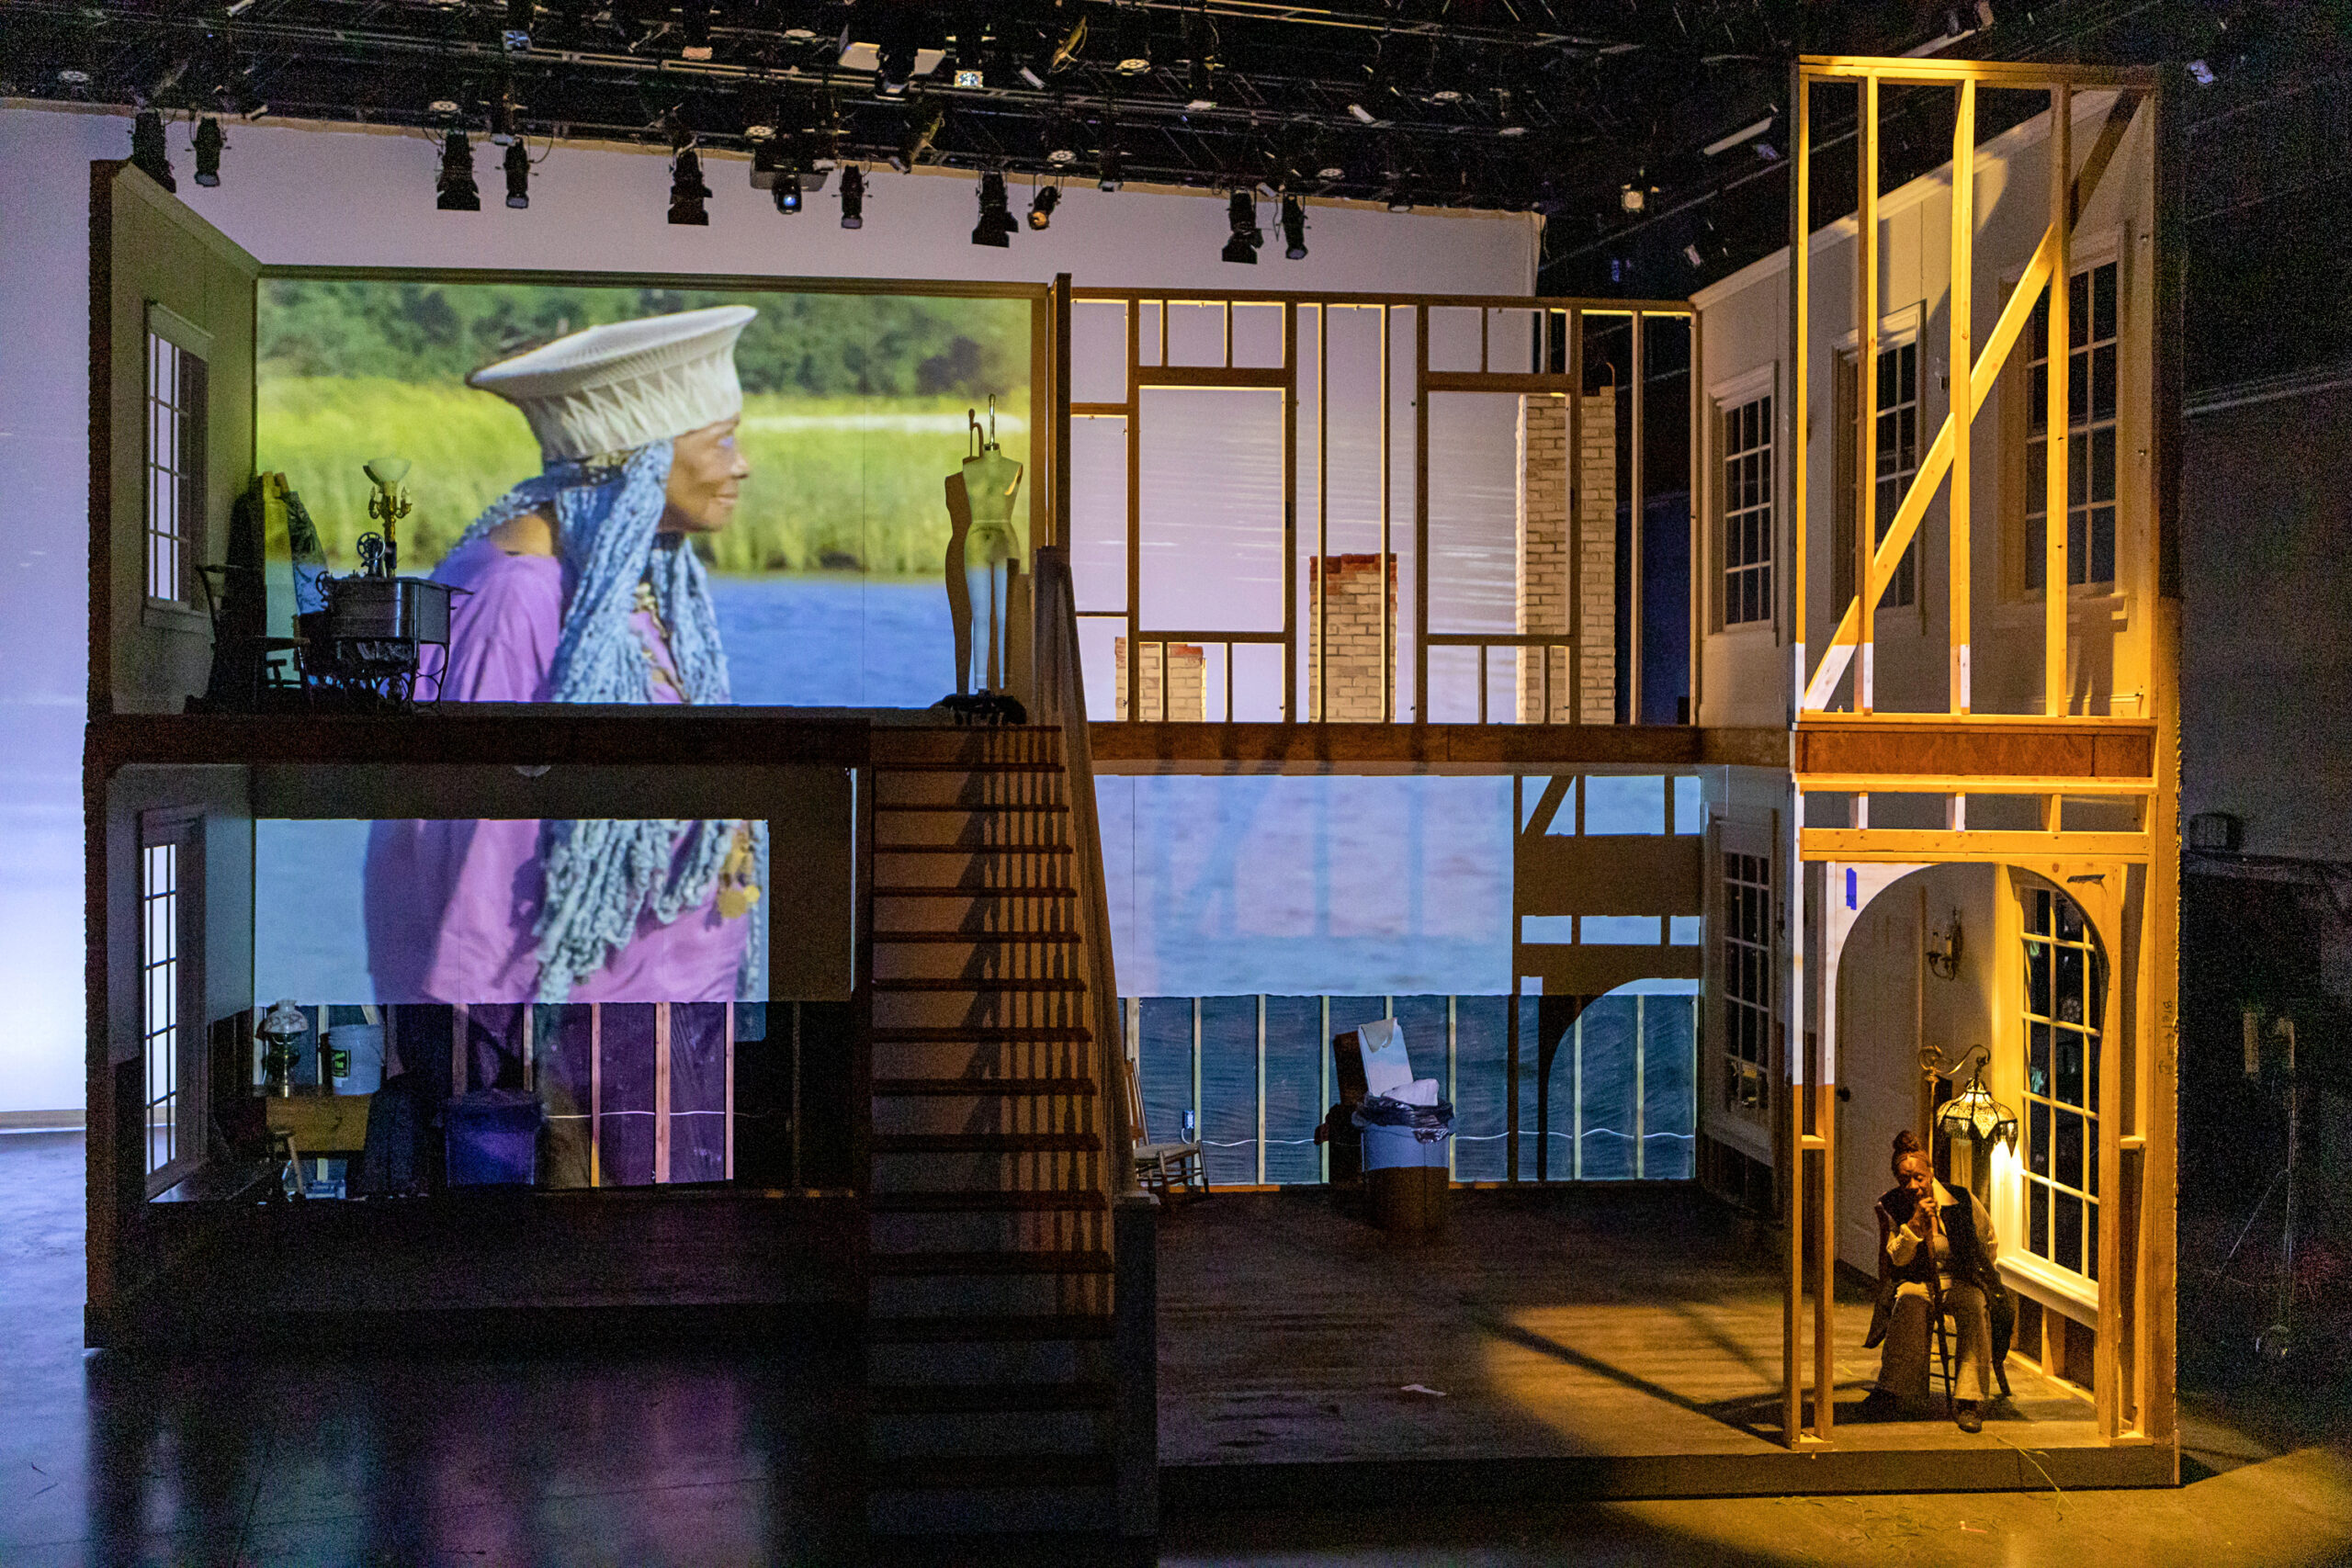 Film is projected over a set that suggests the skeleton of a two story house. A Black woman sits downstage left, under an archway, chin in hand as she stares into the middle distance. The projection shows an older Black woman with cerulean blue braids standing in profile before sky blue water and long green grass.